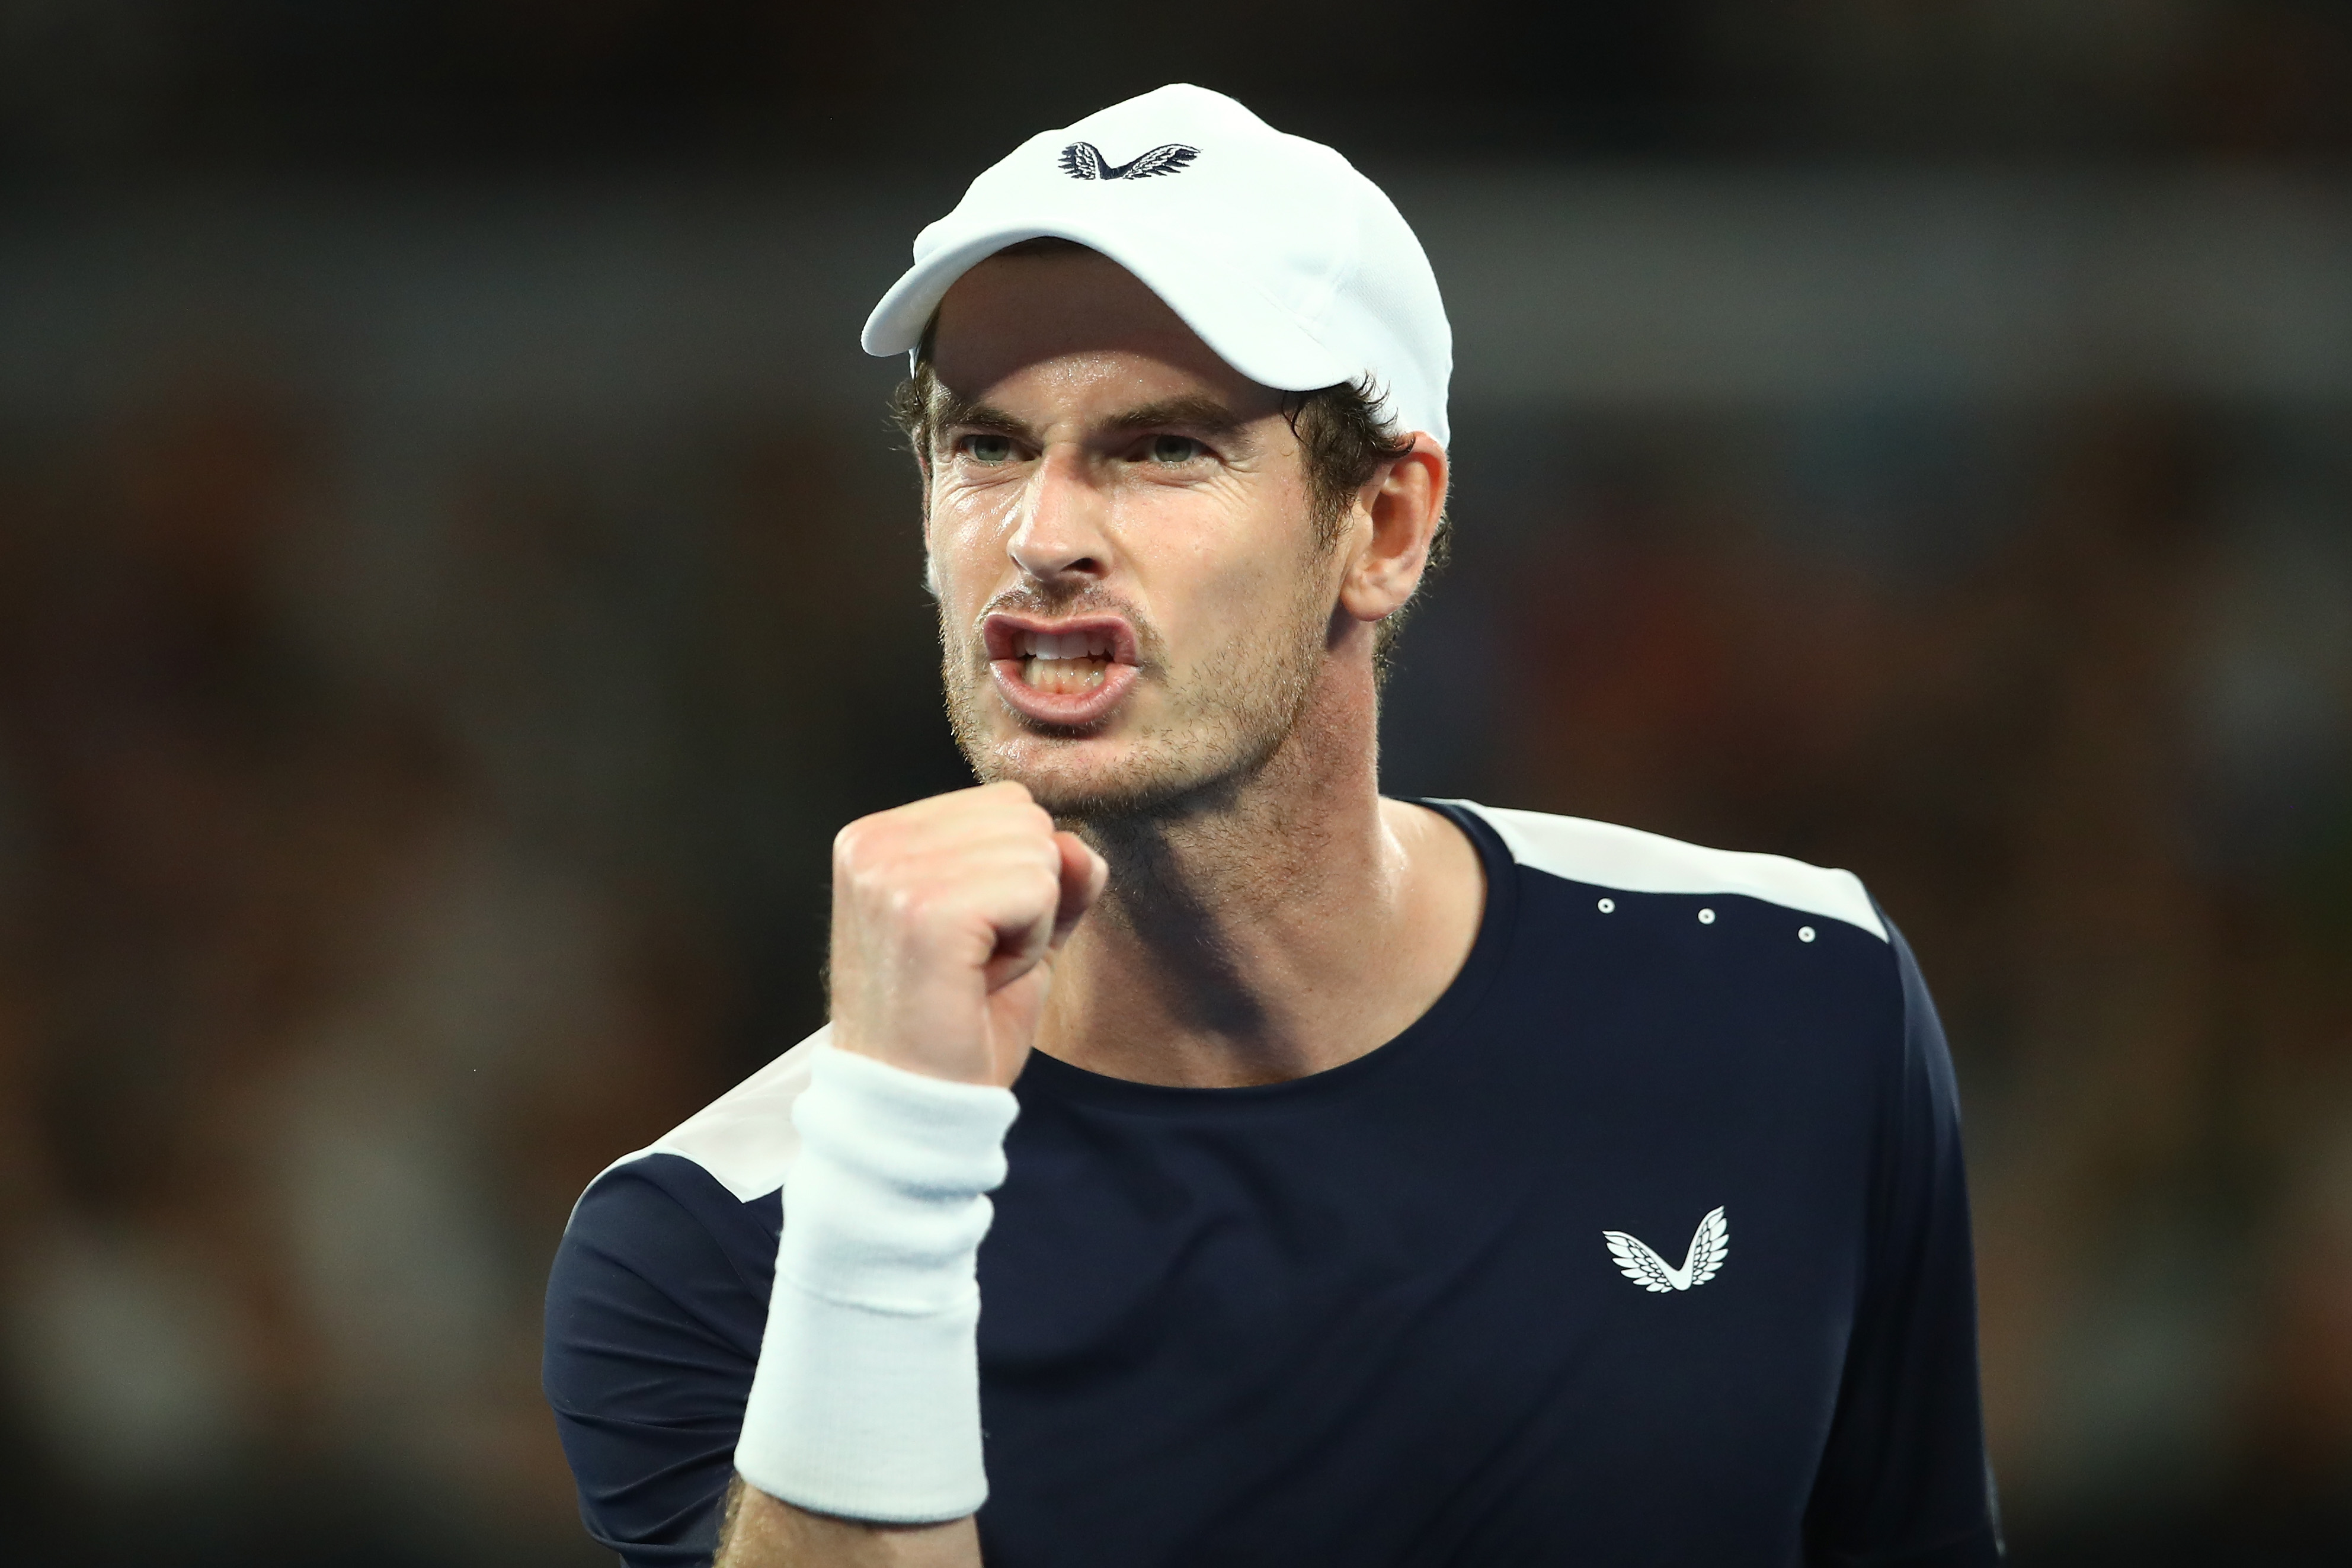 Andy Murray has netted his biggest win since coming back from a hip operation.